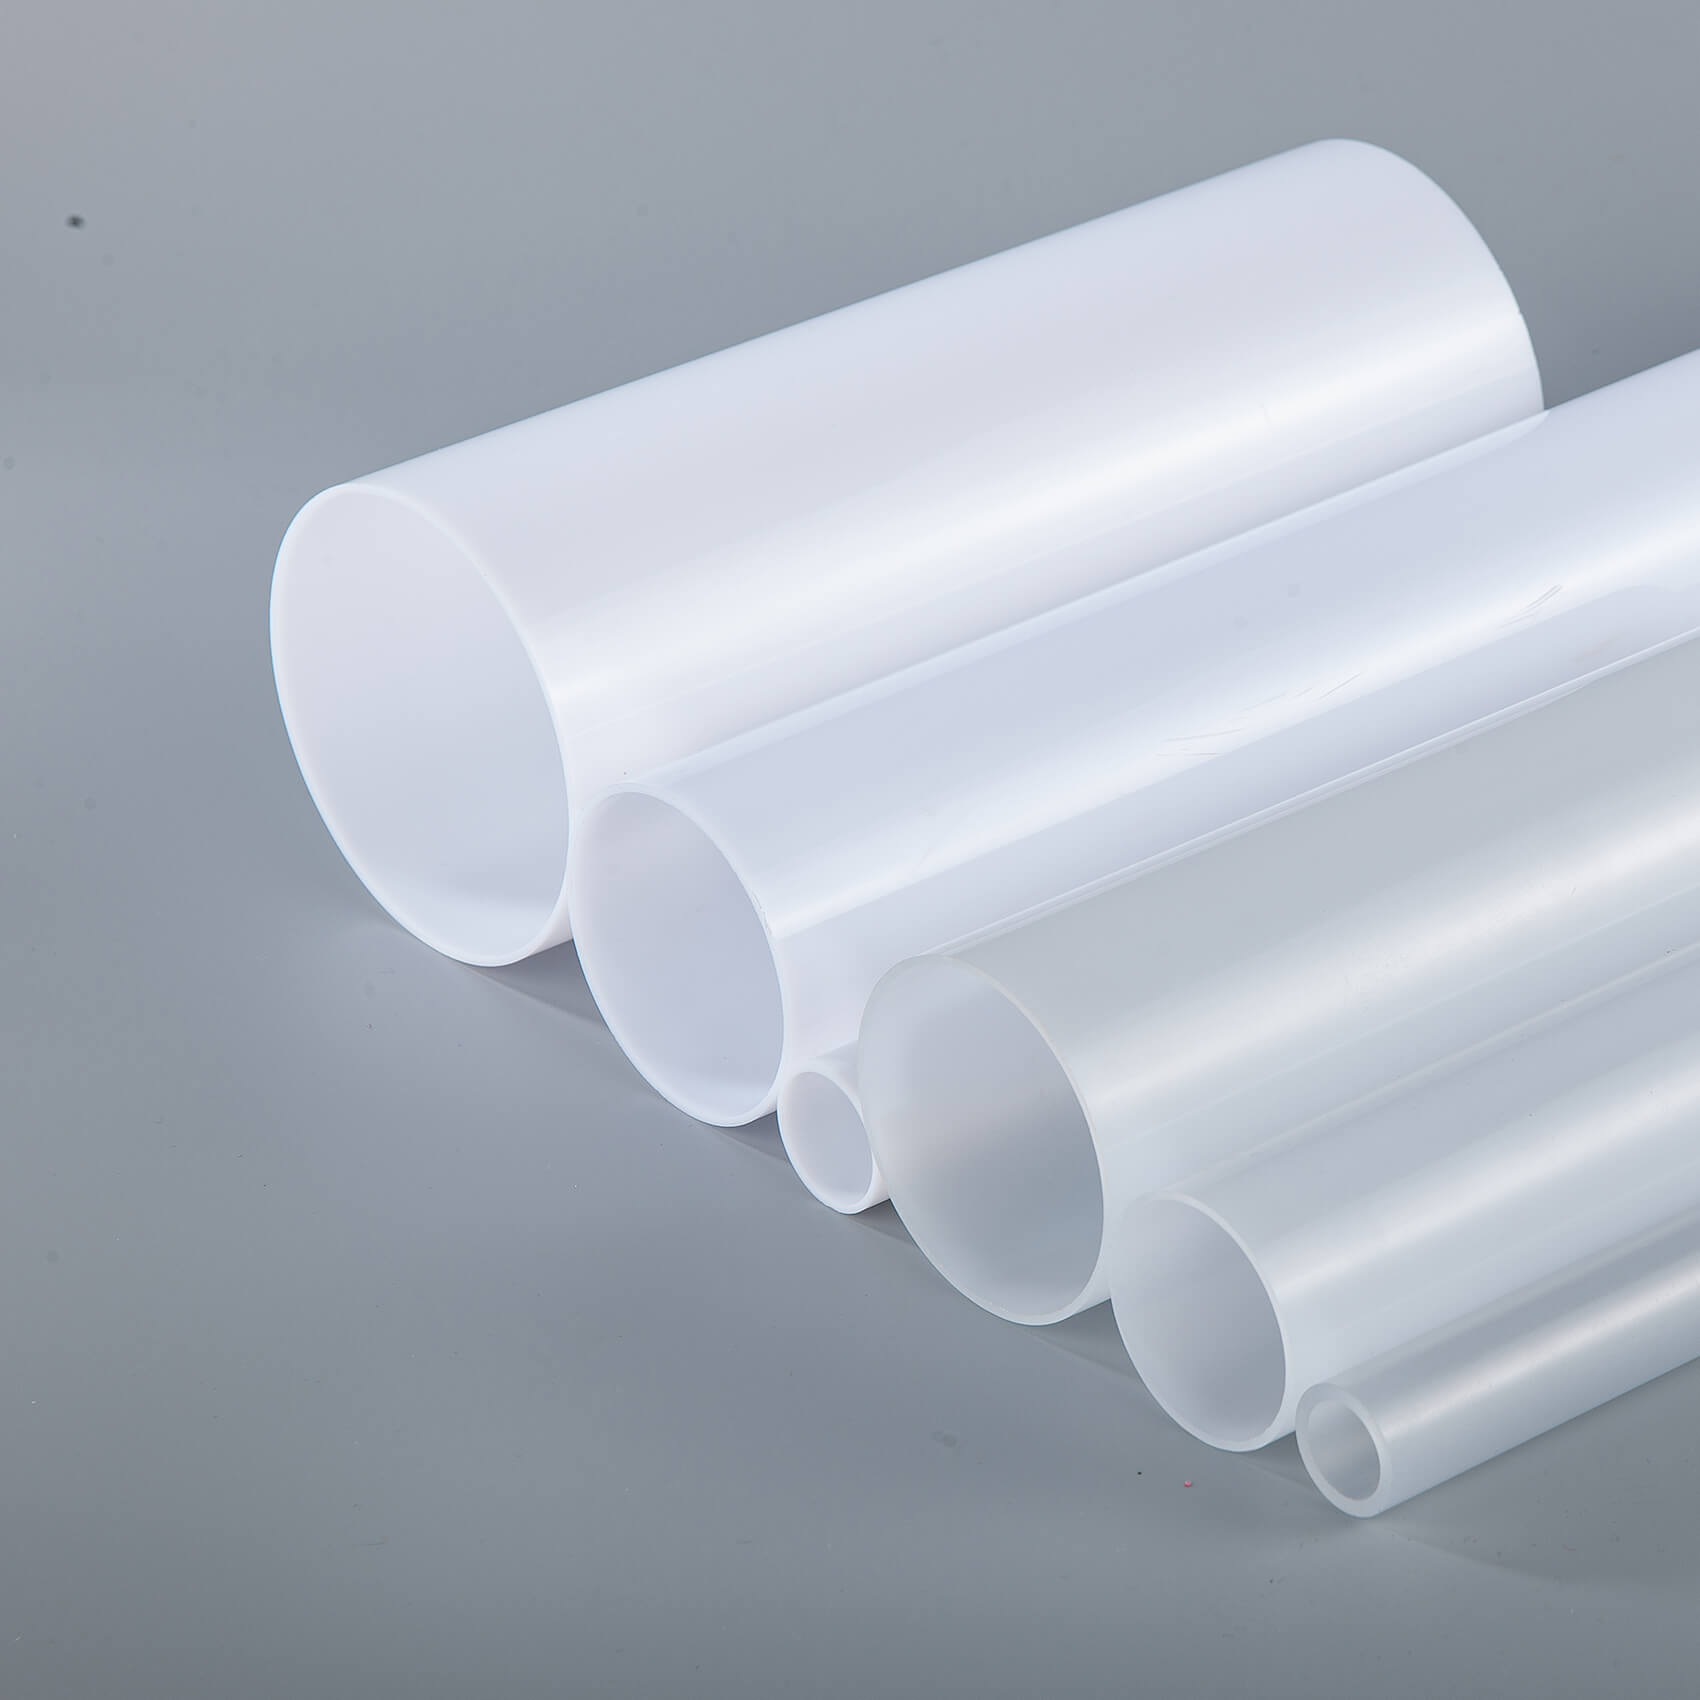 Mingshi extruded diffused polycarbonate tubes